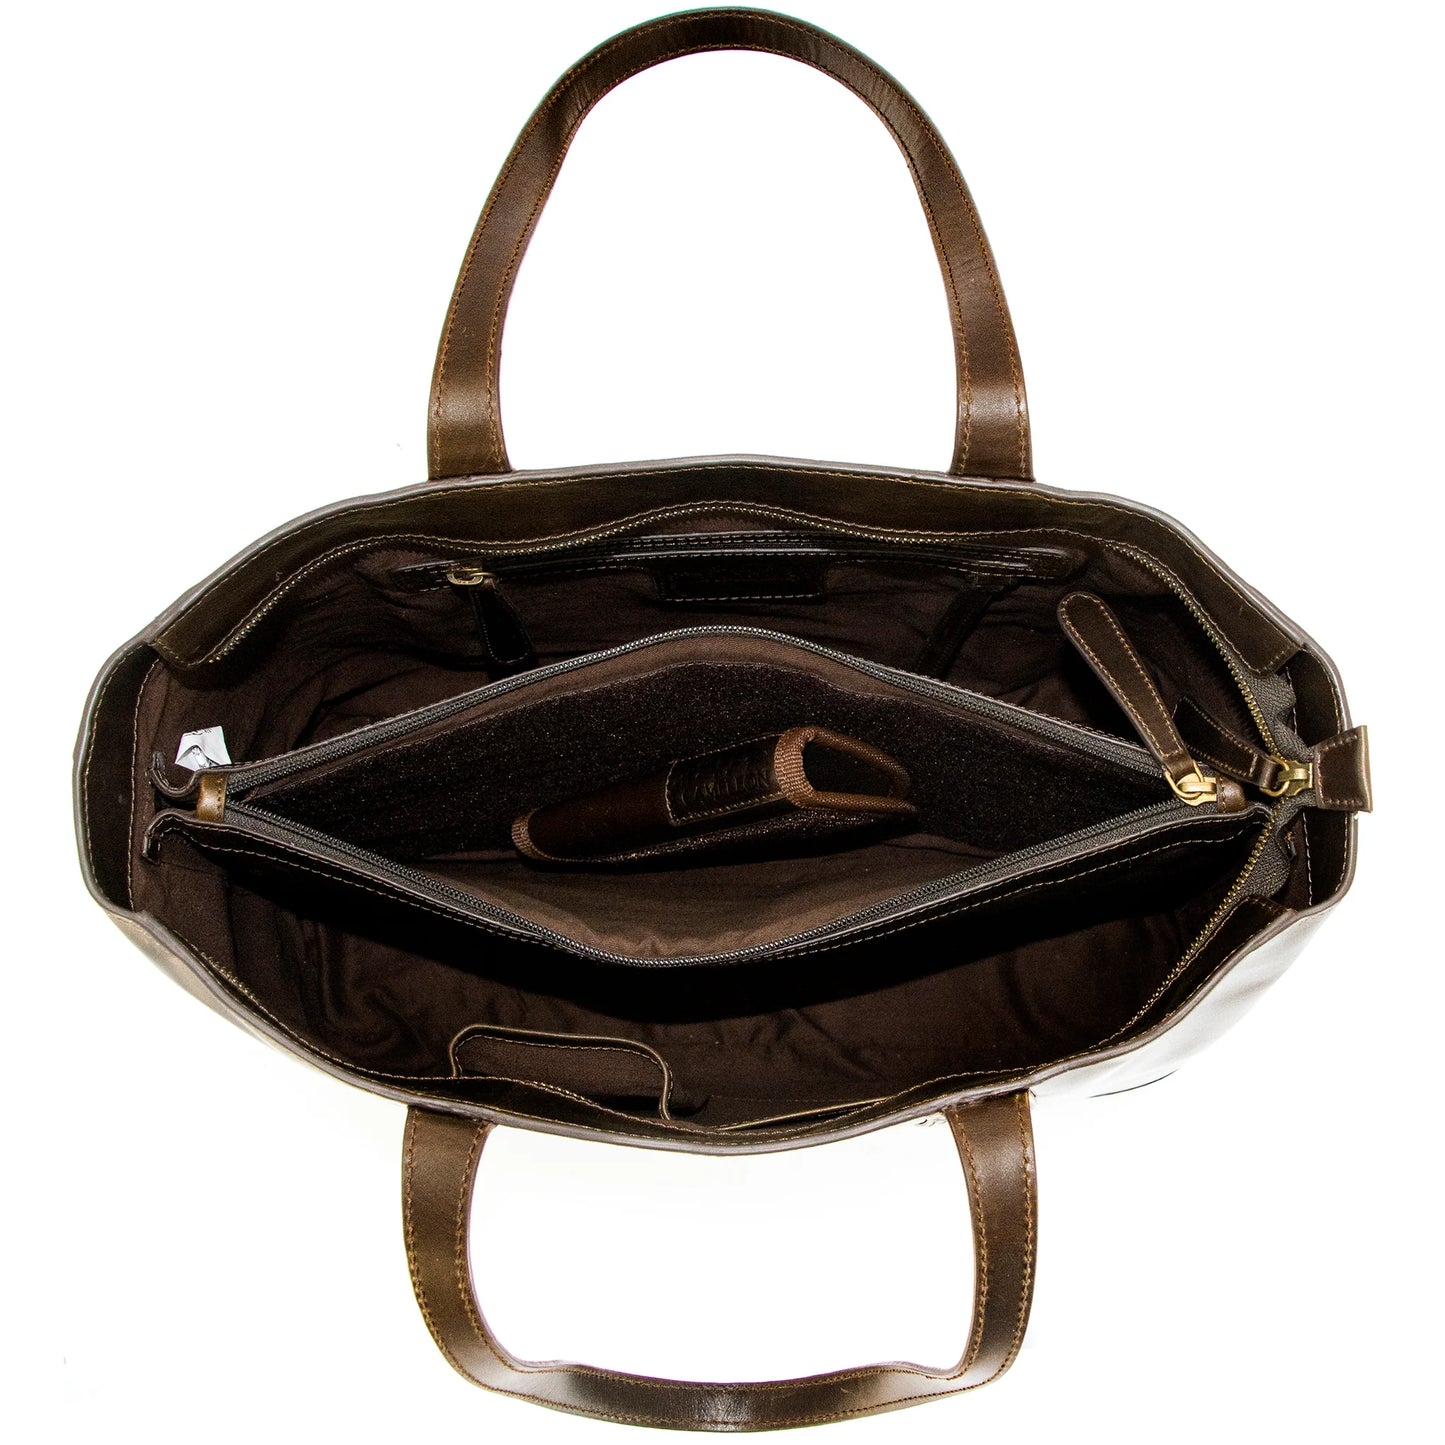 Cameleon Gaia Conceal Carry - Purse Open Tote Brown Leather